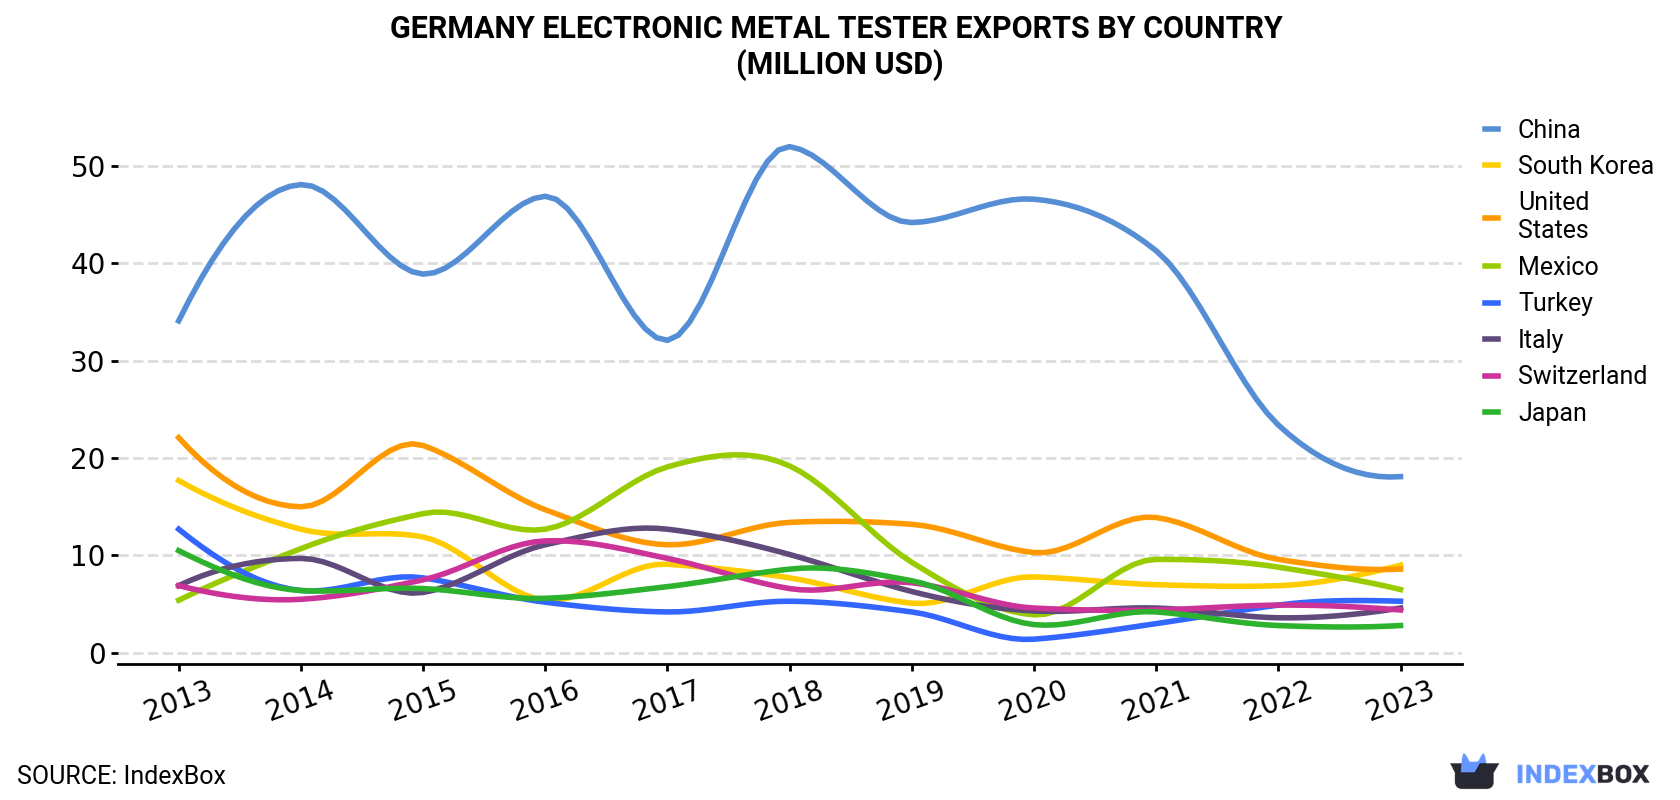 Germany Electronic Metal Tester Exports By Country (Million USD)